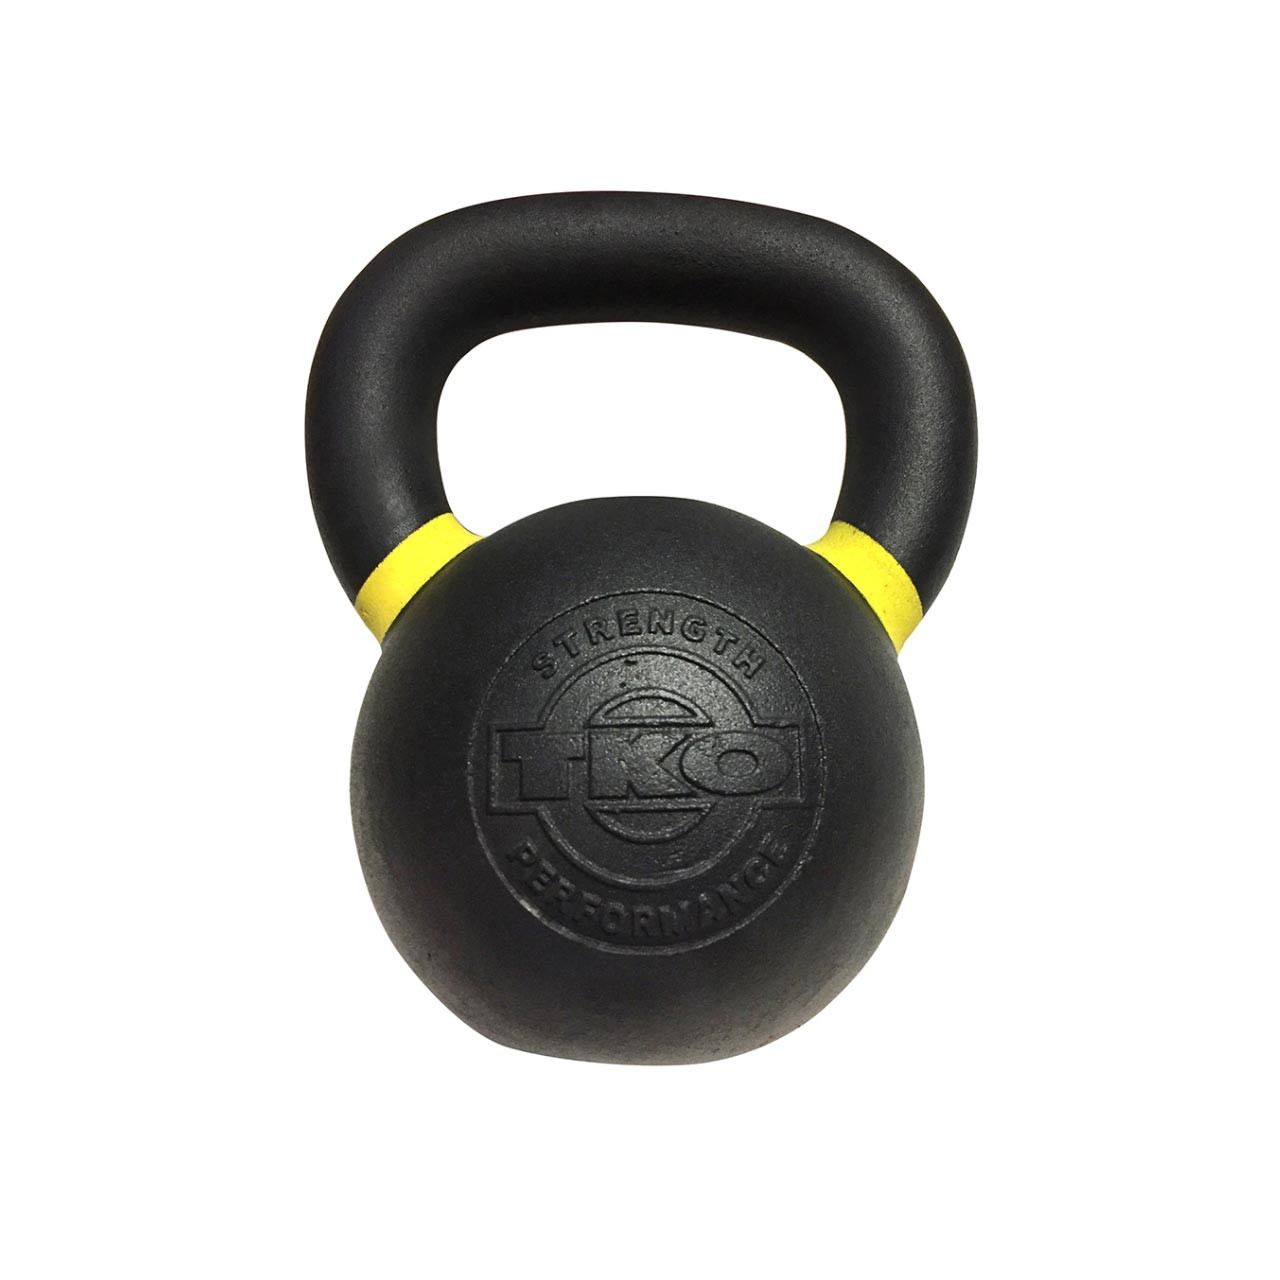 24kg Pro Forged Kettlebell